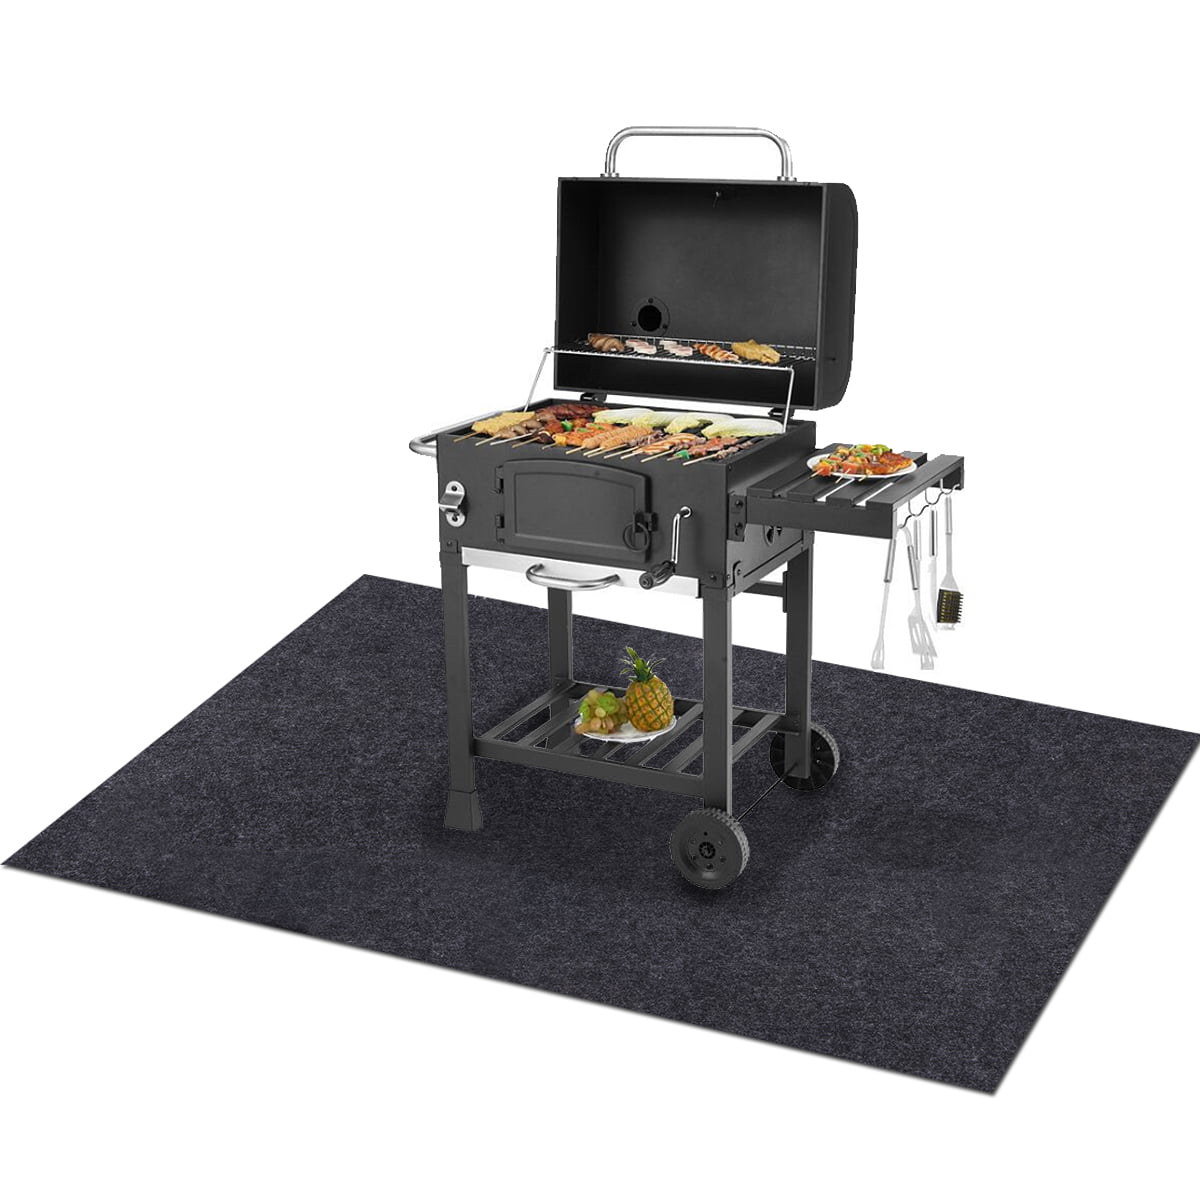 48”×72“ Gas Grill Mat,BBQ Grilling Gear for Gas/Absorbent Grill Pad Lightweight Washable Floor Mat to Protect Decks and Patios from Grease Splatter,Against Damage and Oil Stains 